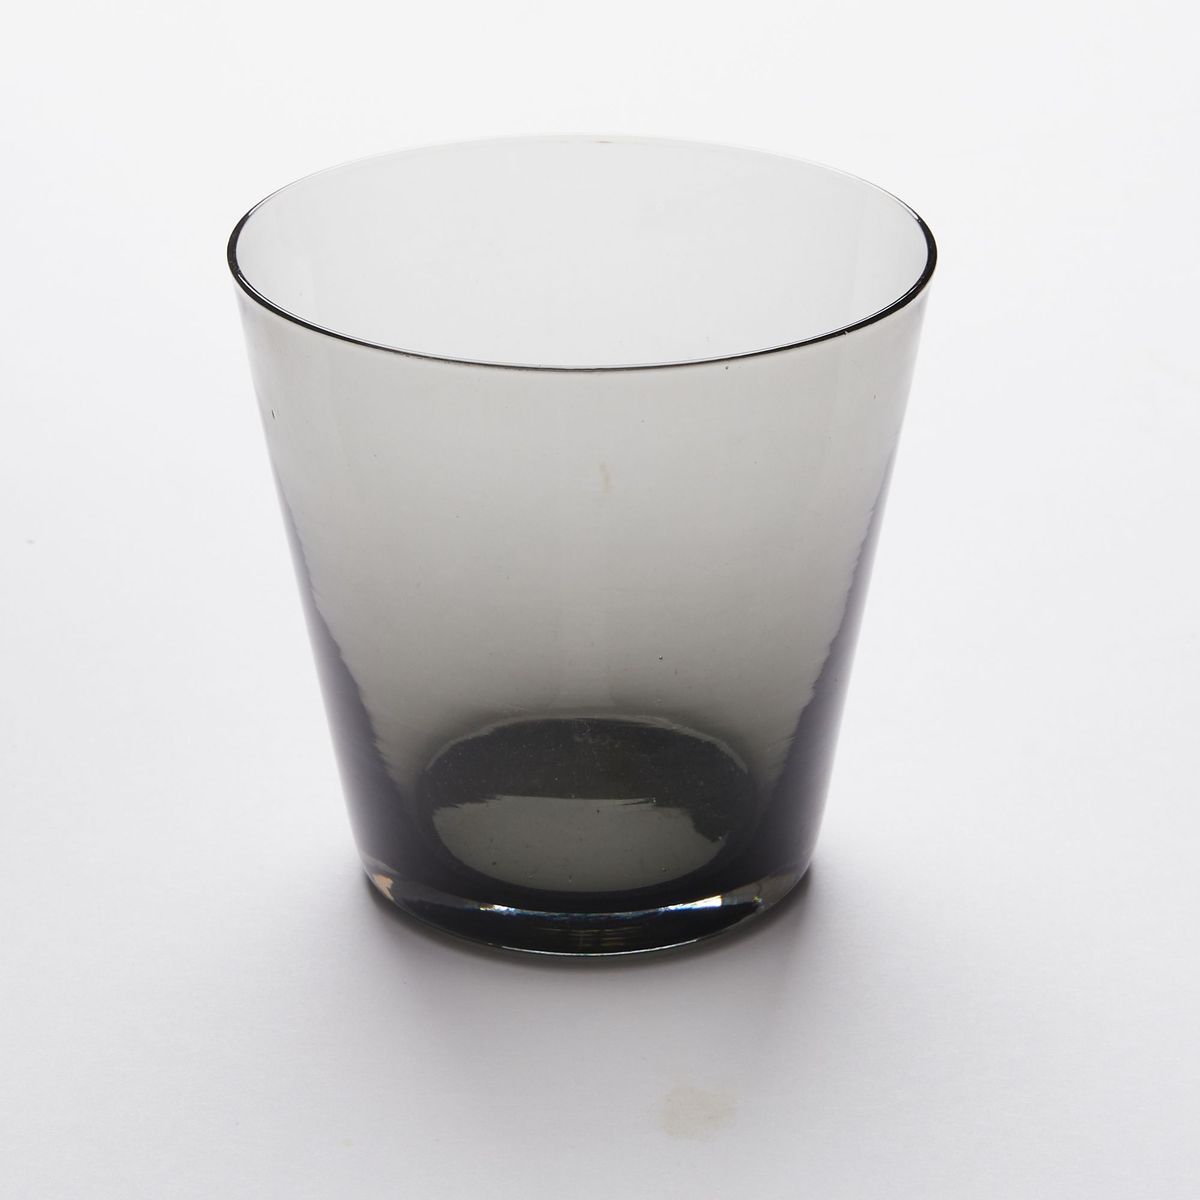 A short drinking glass made of black colored glass